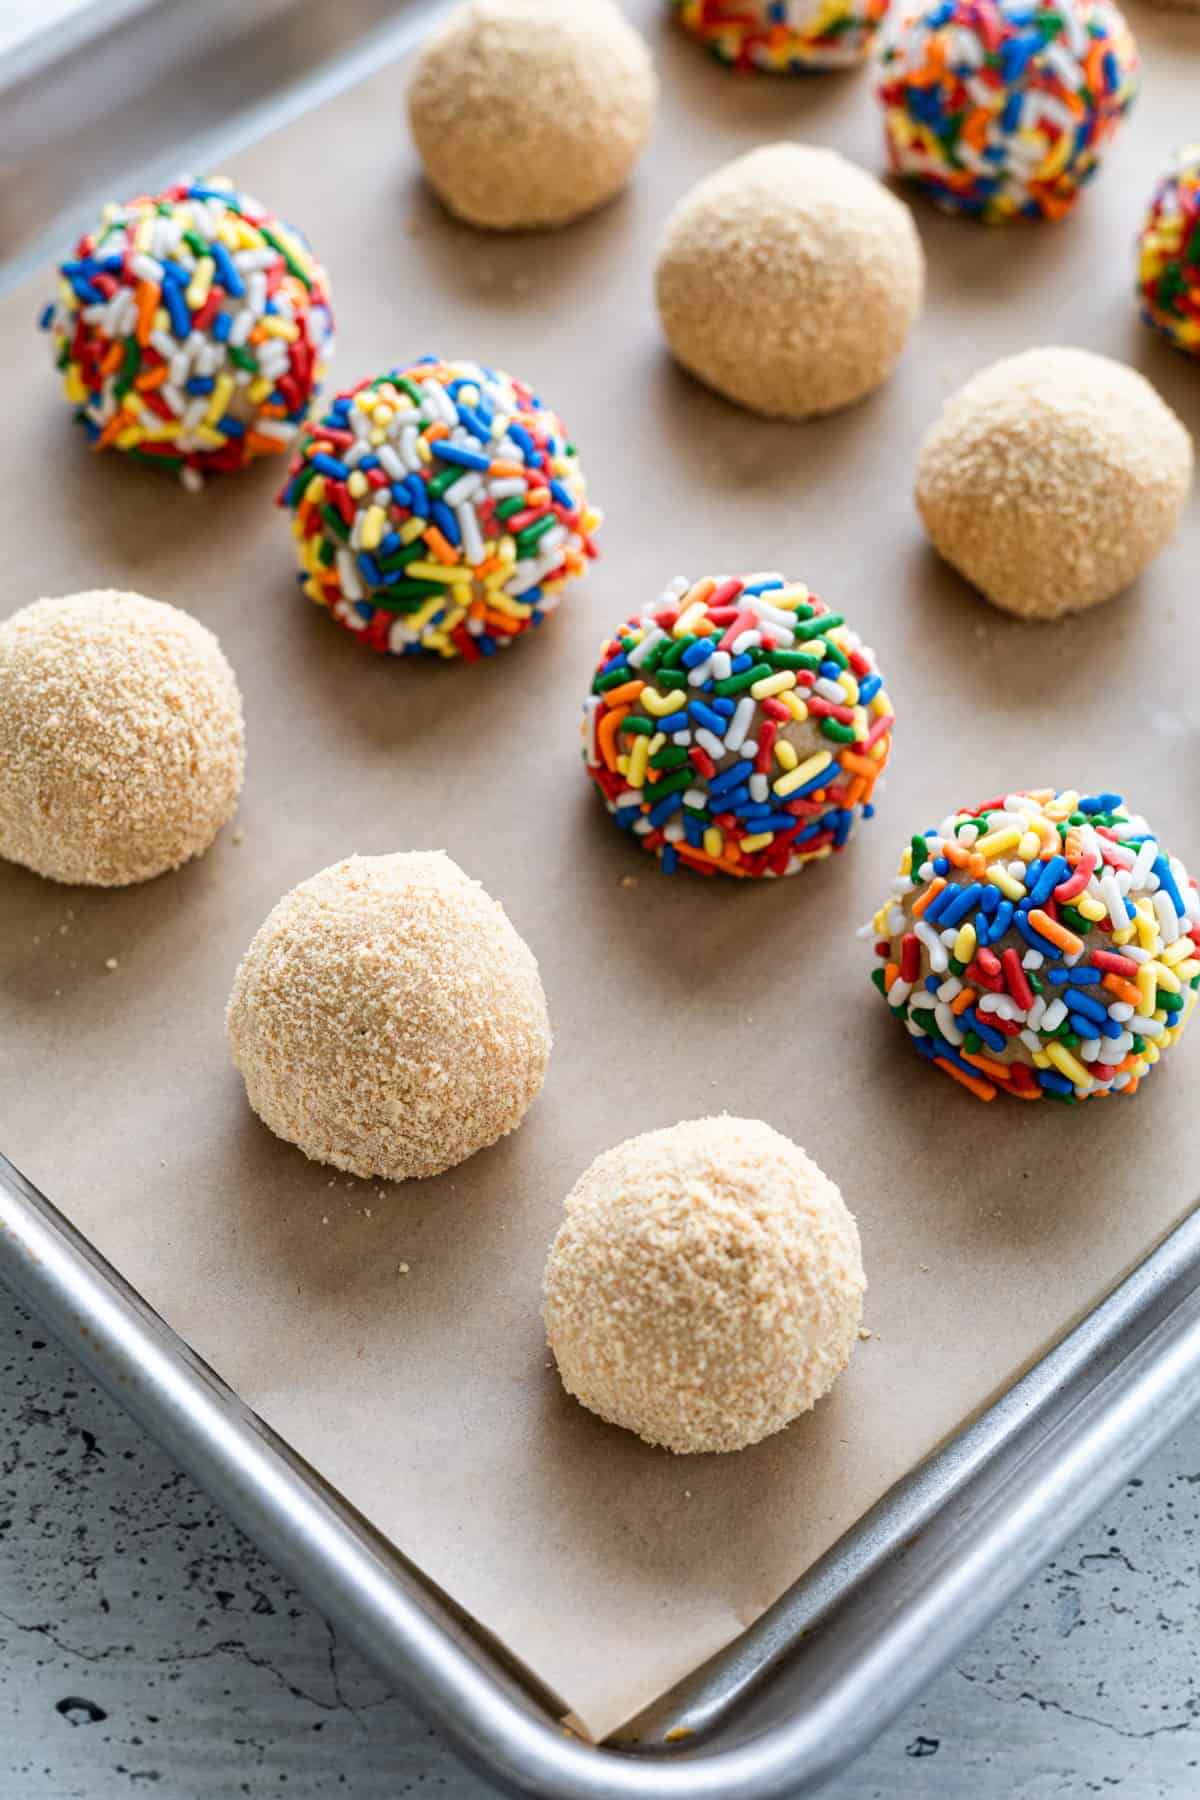 Cheesecake balls coated in toppings on a parchment-lined tray.